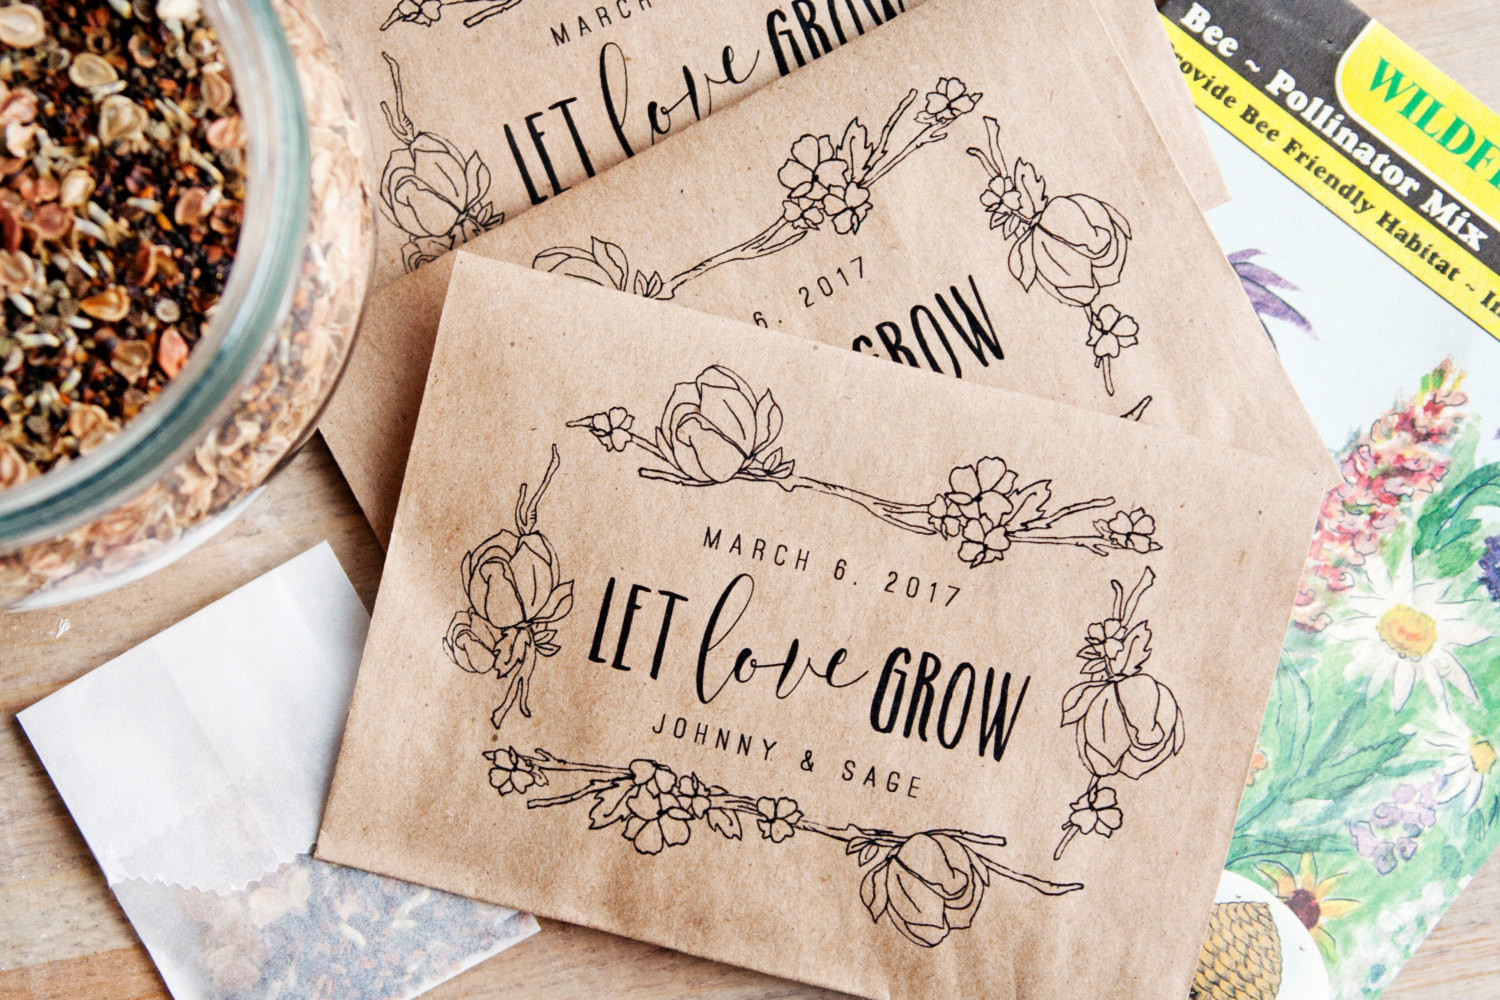 Wedding Favor Seed Packets
 Where to Buy Seed Packet Favors for Weddings